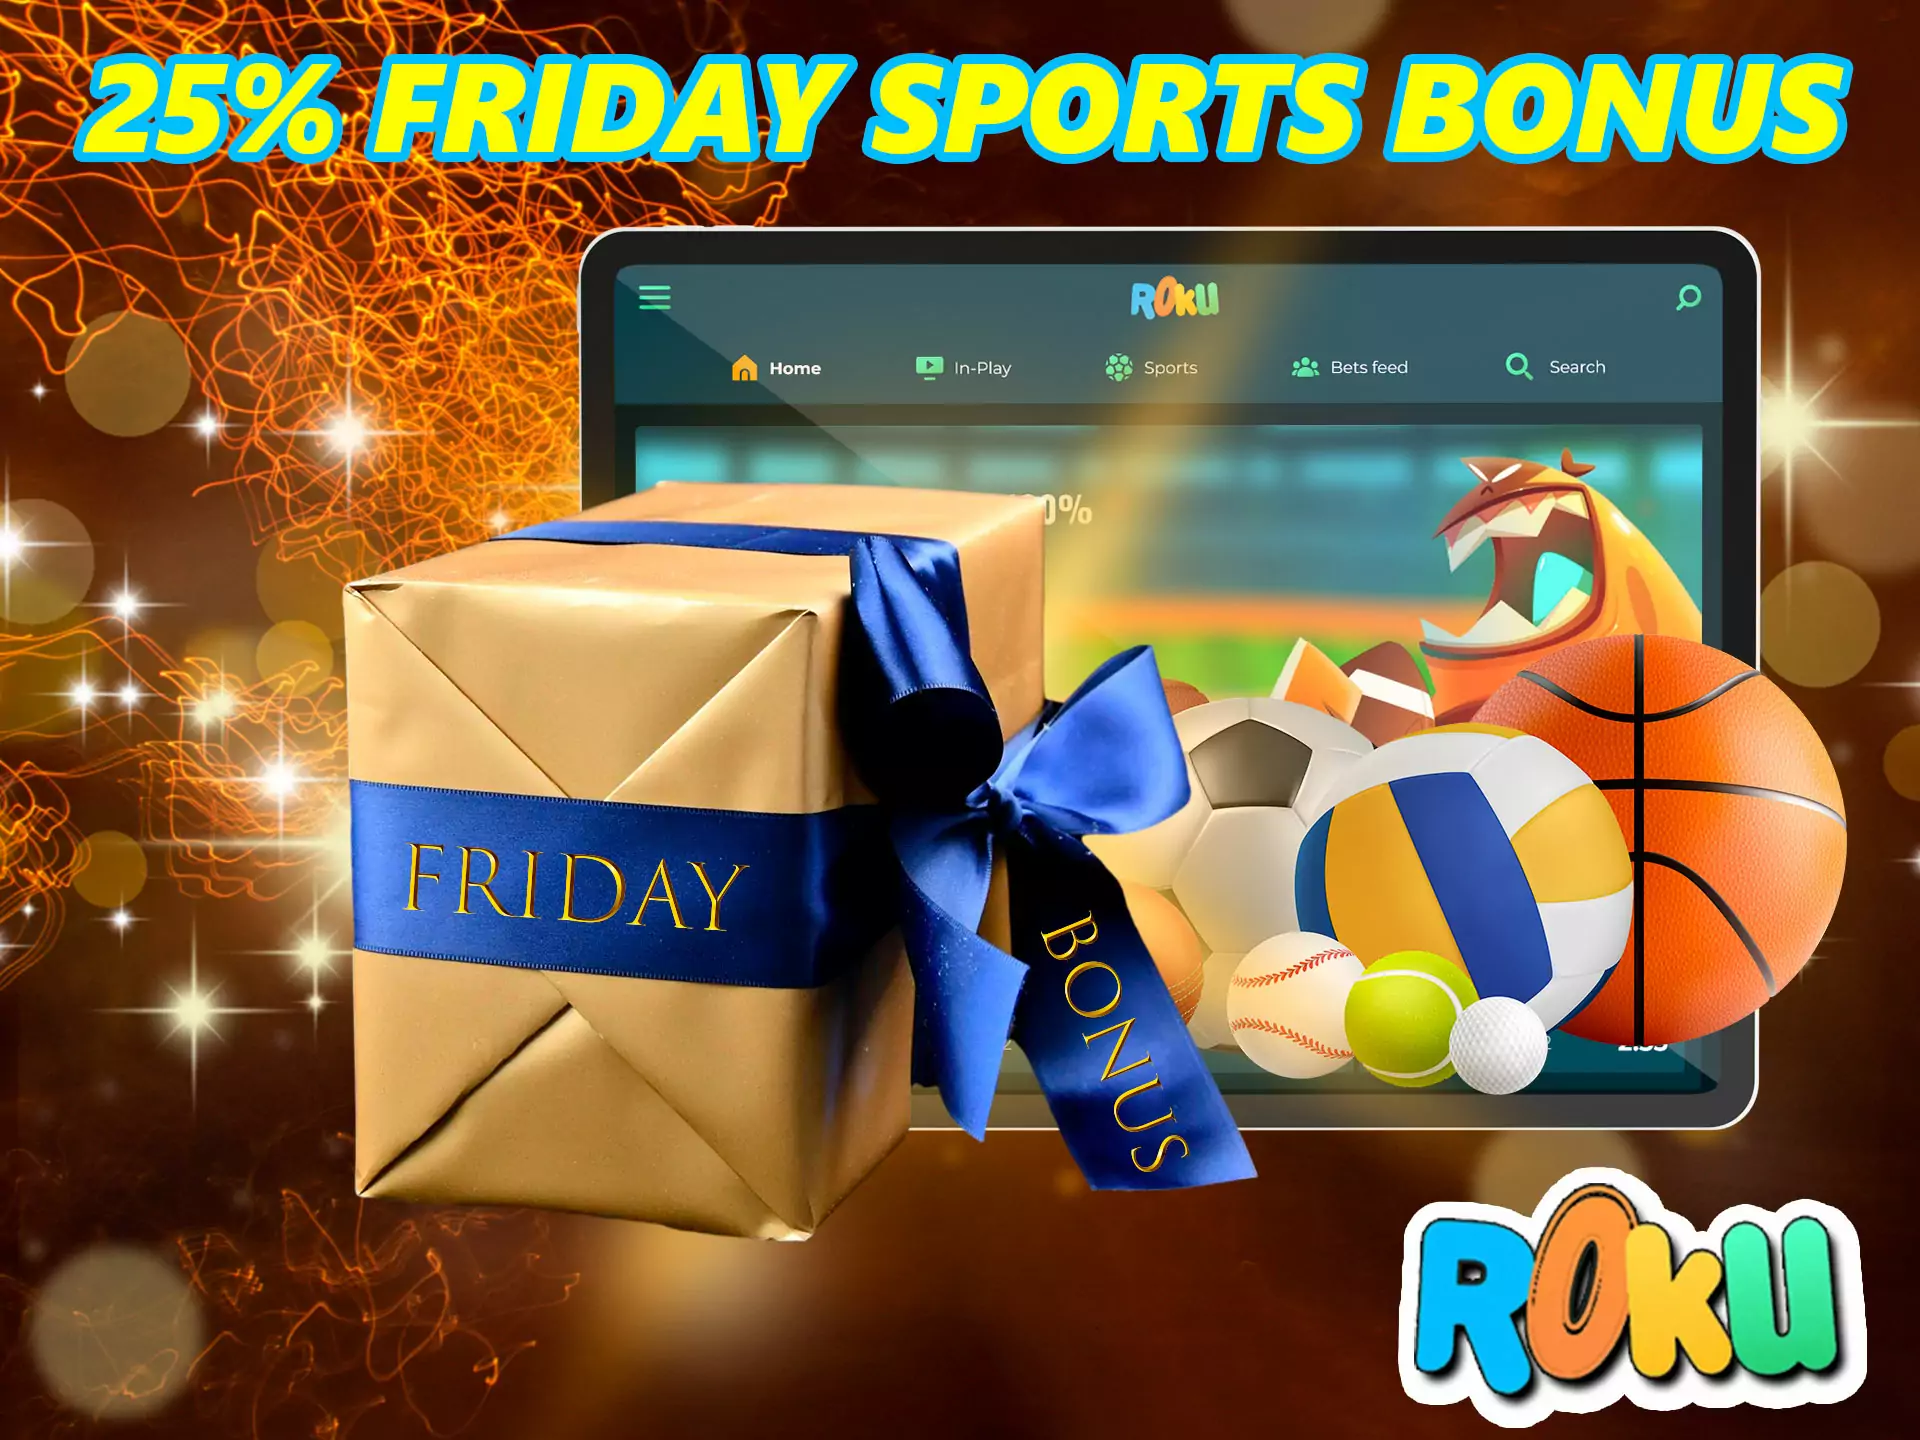 We recommend visiting Roku on the last day of the working week, fund your account and you have a chance to get +25% to your gaming account.